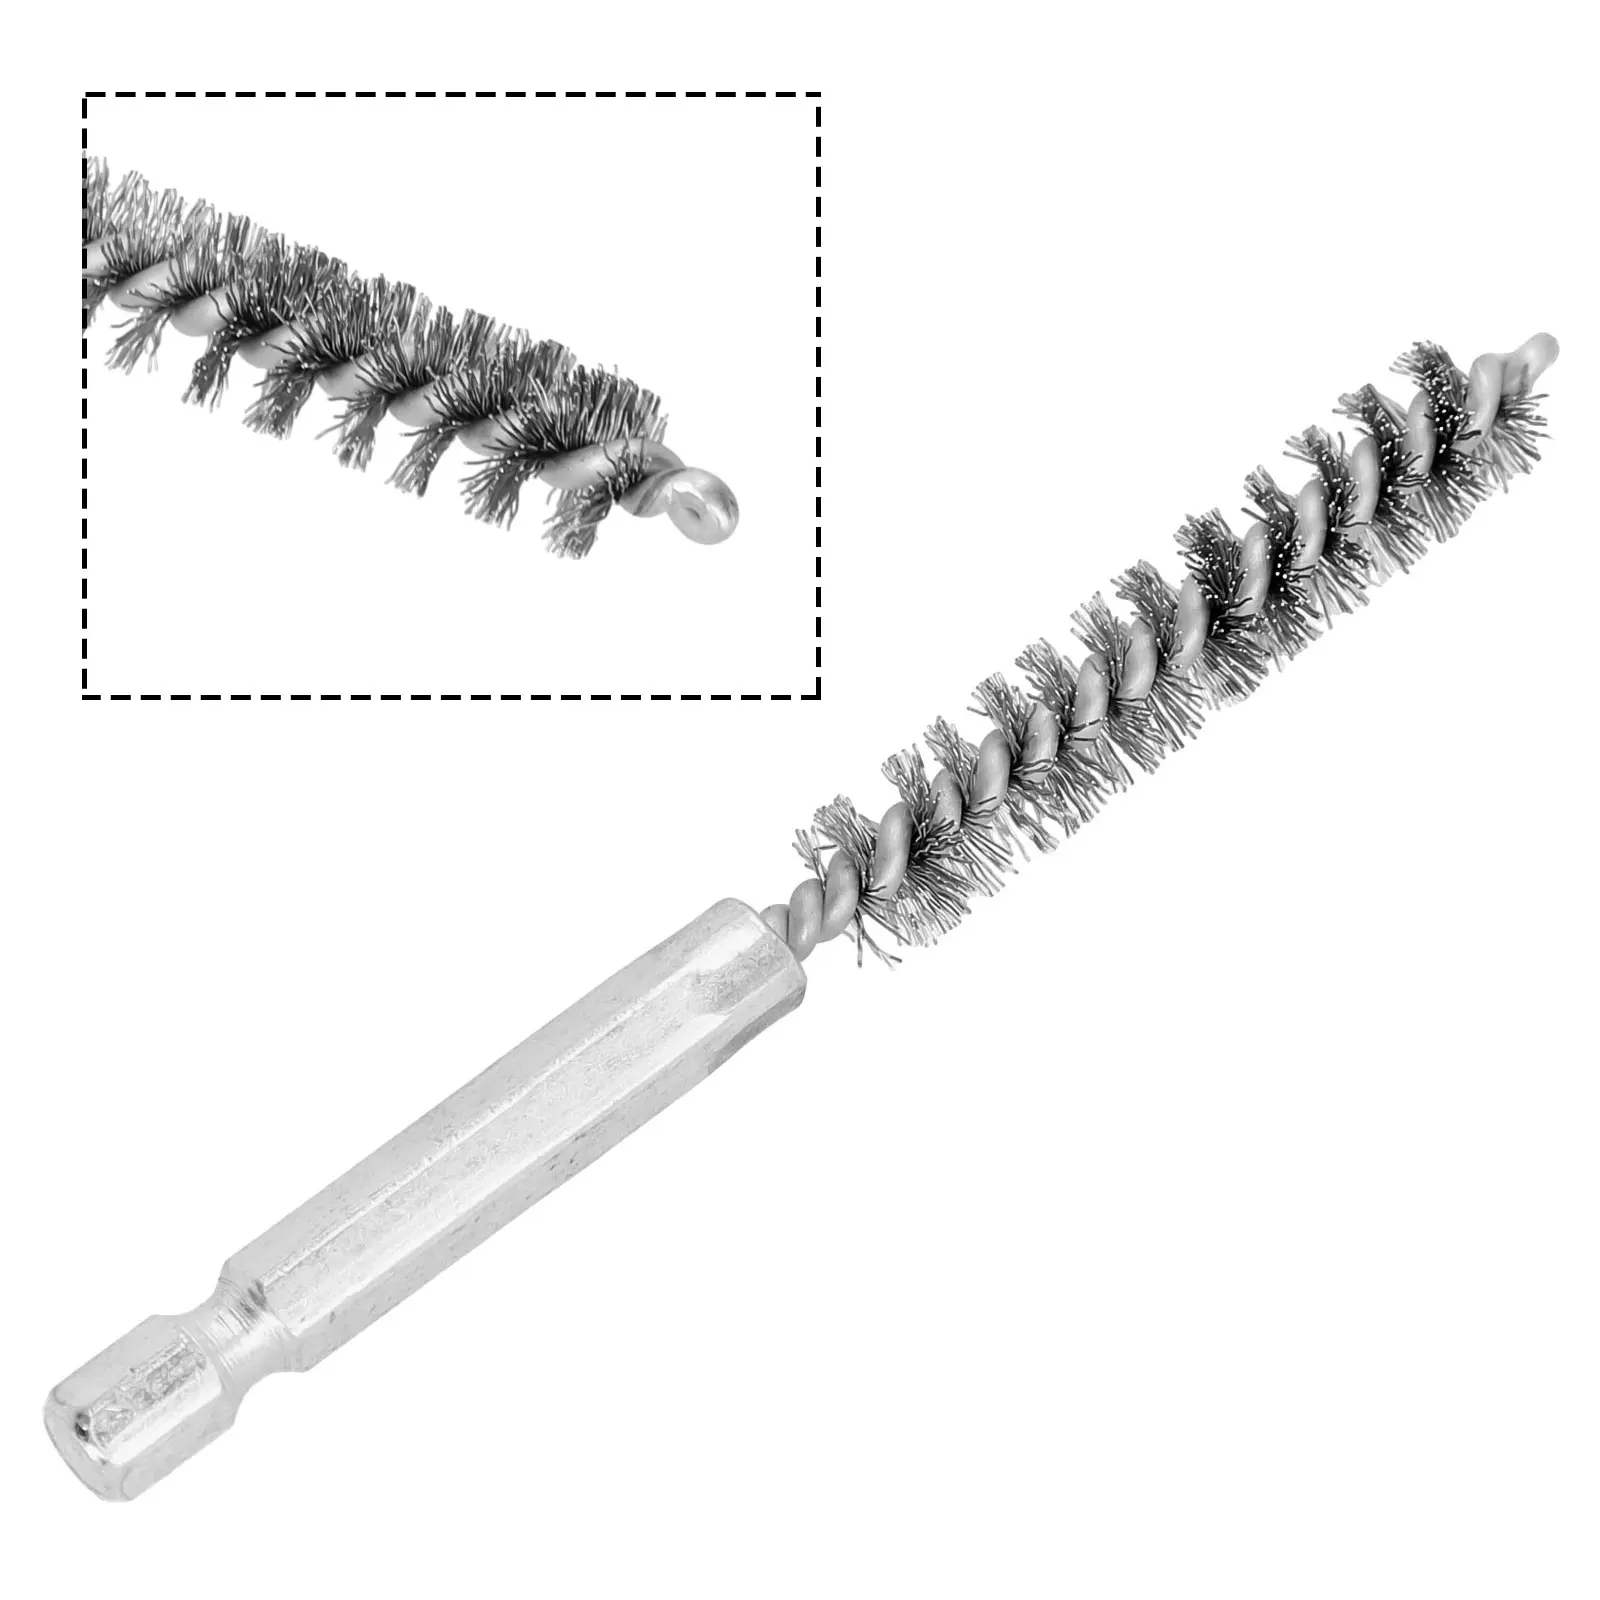 

1pc 9-25mm Wire Tube Machinery Cleaning Brush Rust Cleaner Washing Polishing Tool For Cleaning Polishing Removing Paint/rust